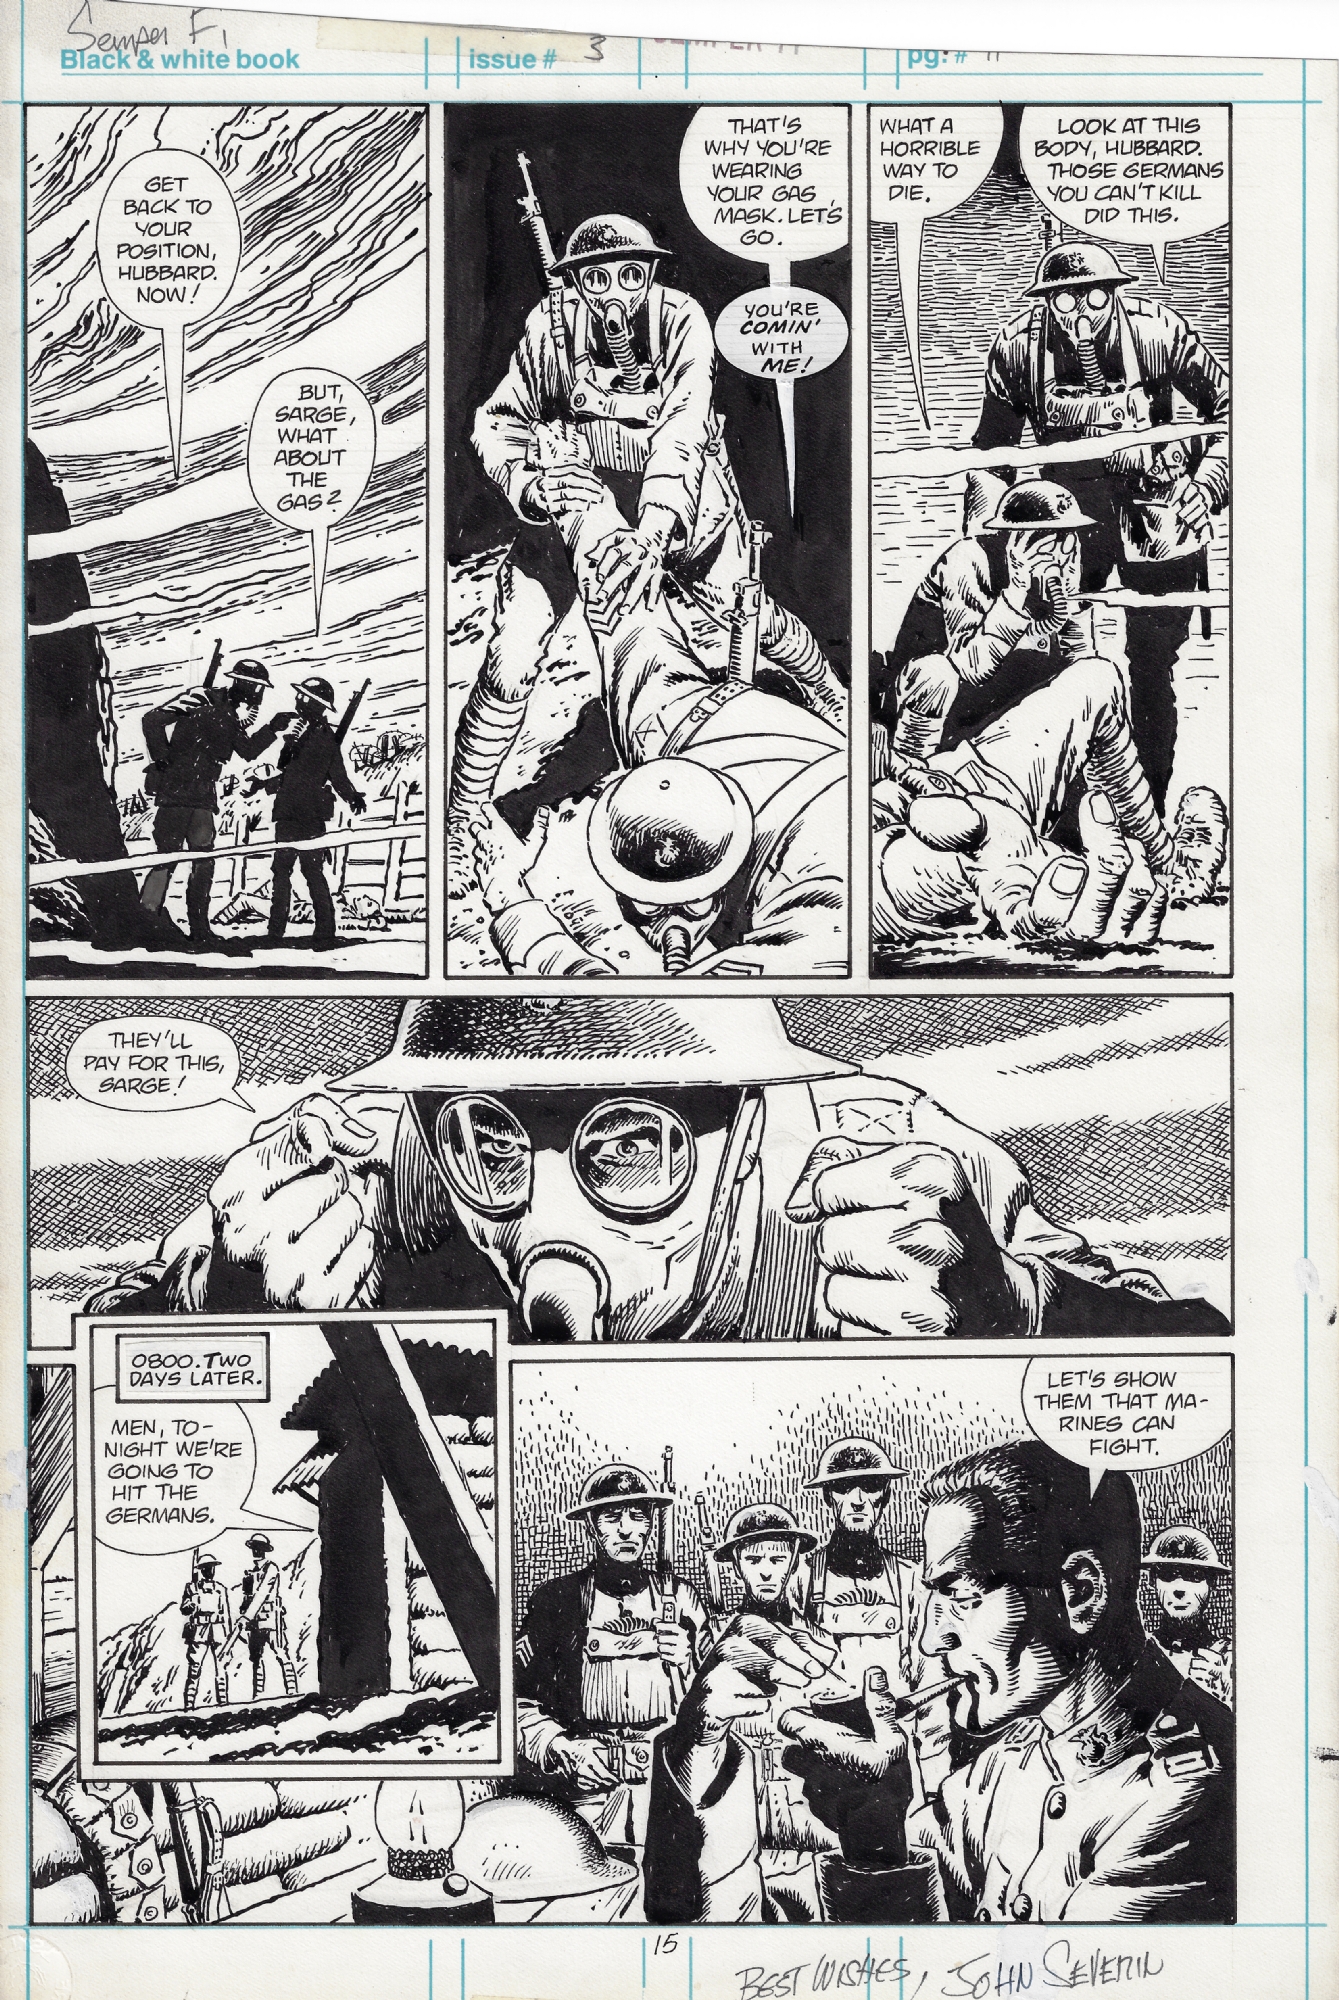 Semper Fi 3, page 15, February 1989 - Andy Kubert and John Severin, in  Peter Roe's World War I Art Comic Art Gallery Room